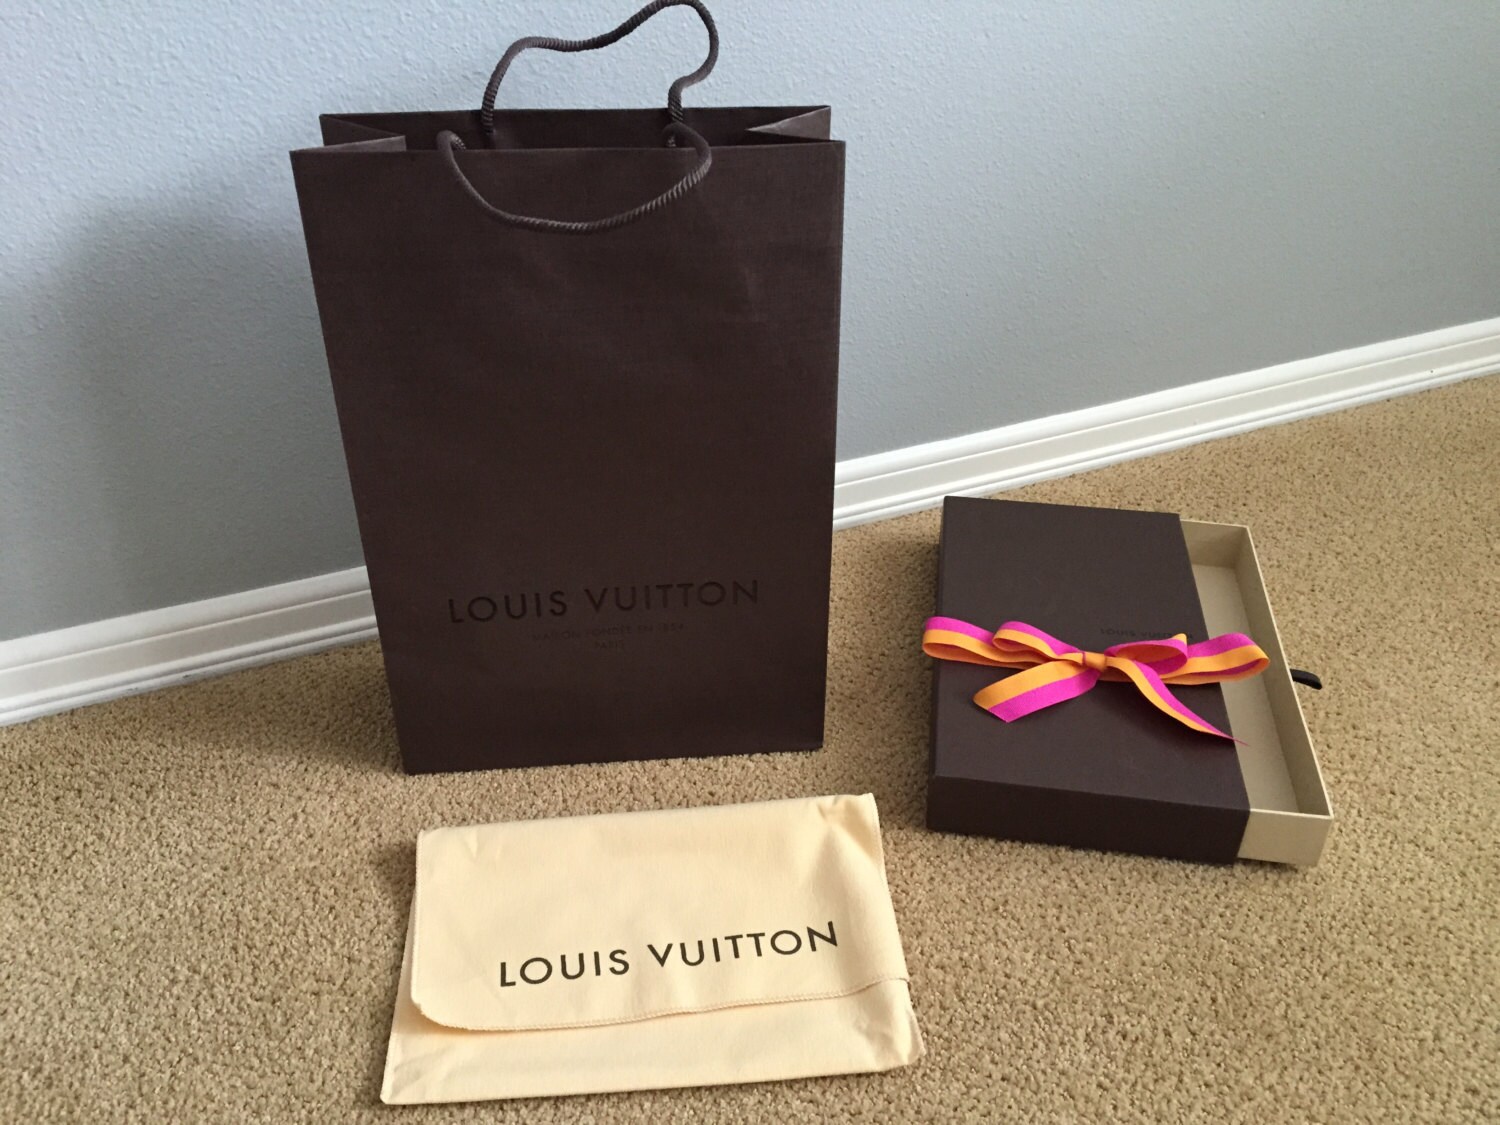 Louis Vuitton Gift Set by ShopSuzy on Etsy